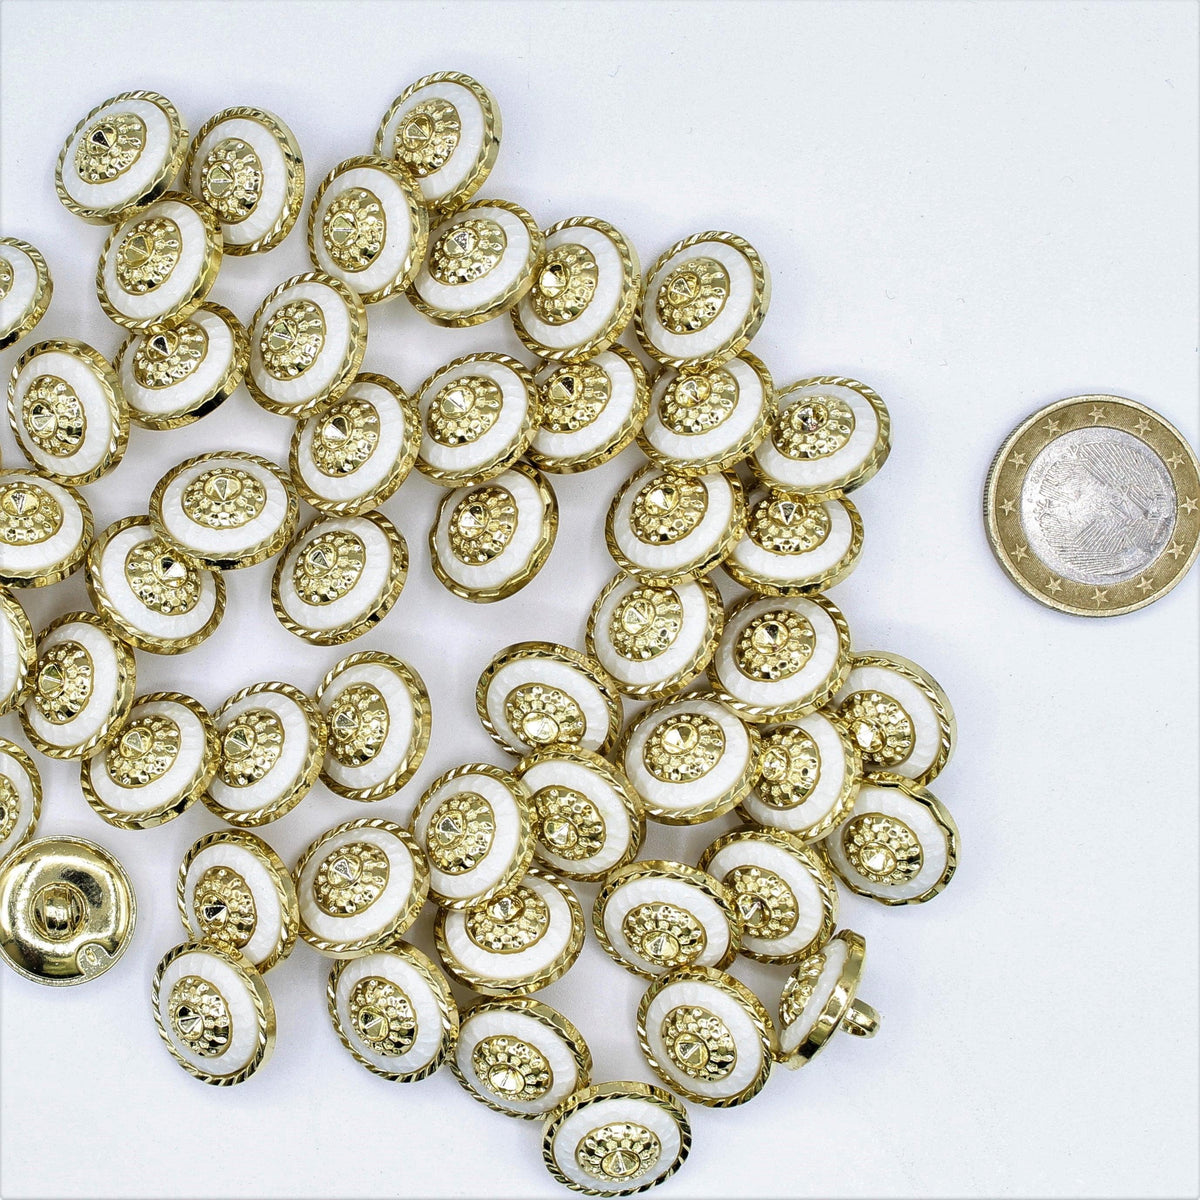 7 and 10mm White and Purple Button with Gold Core and Circle - ACCESSOIRES LEDUC